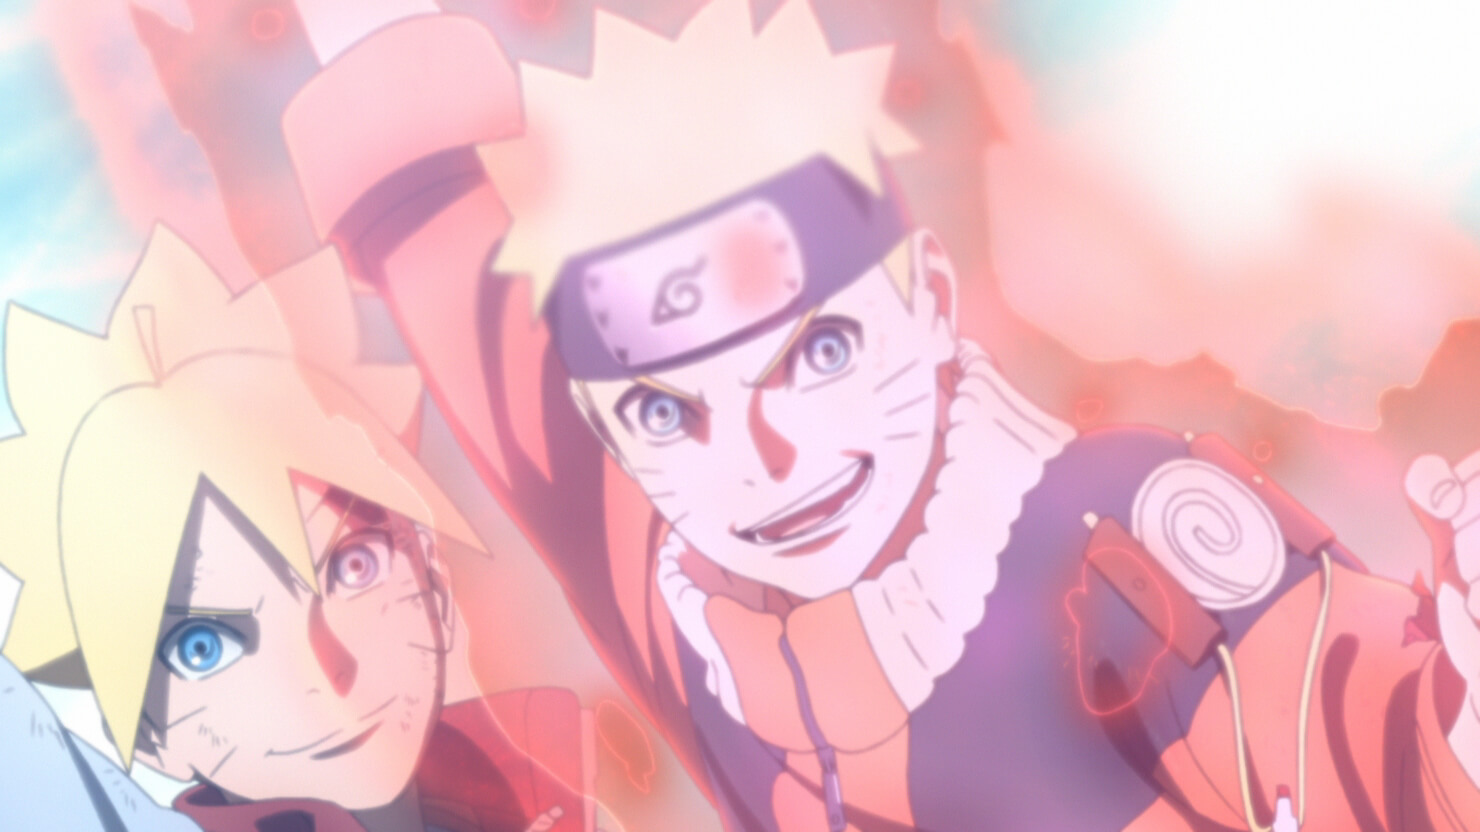 What are your thoughts on the future of Boruto, please go into